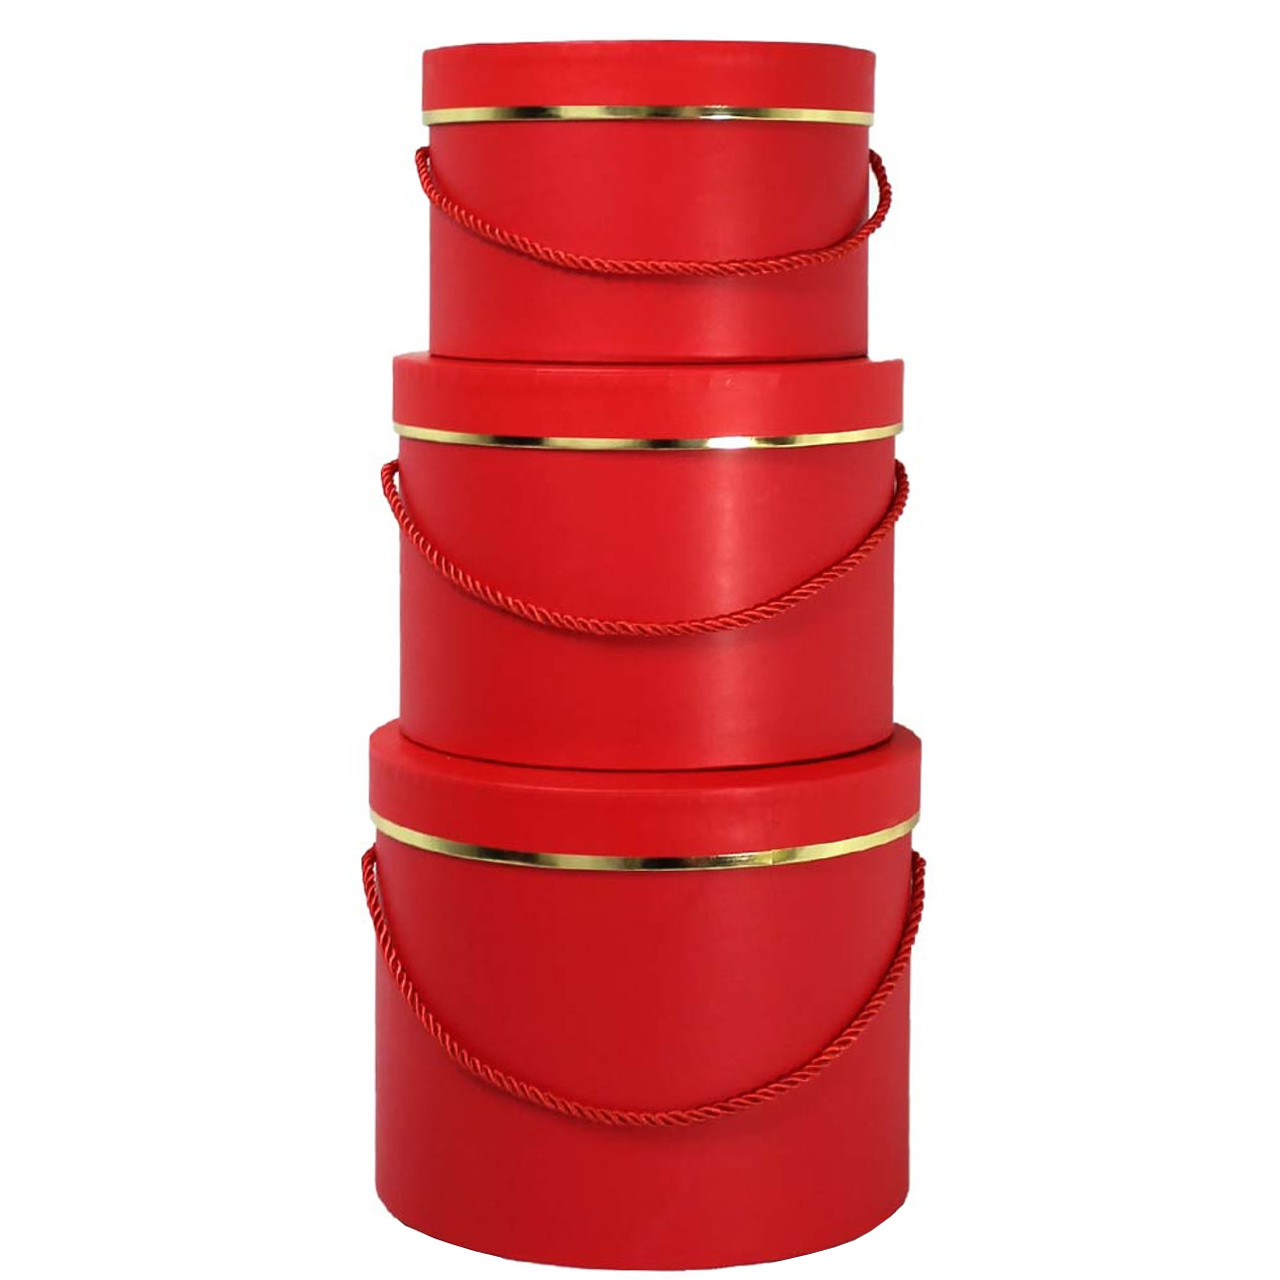 Red Round Floral Hat Box with Gold Accent - Set of 3